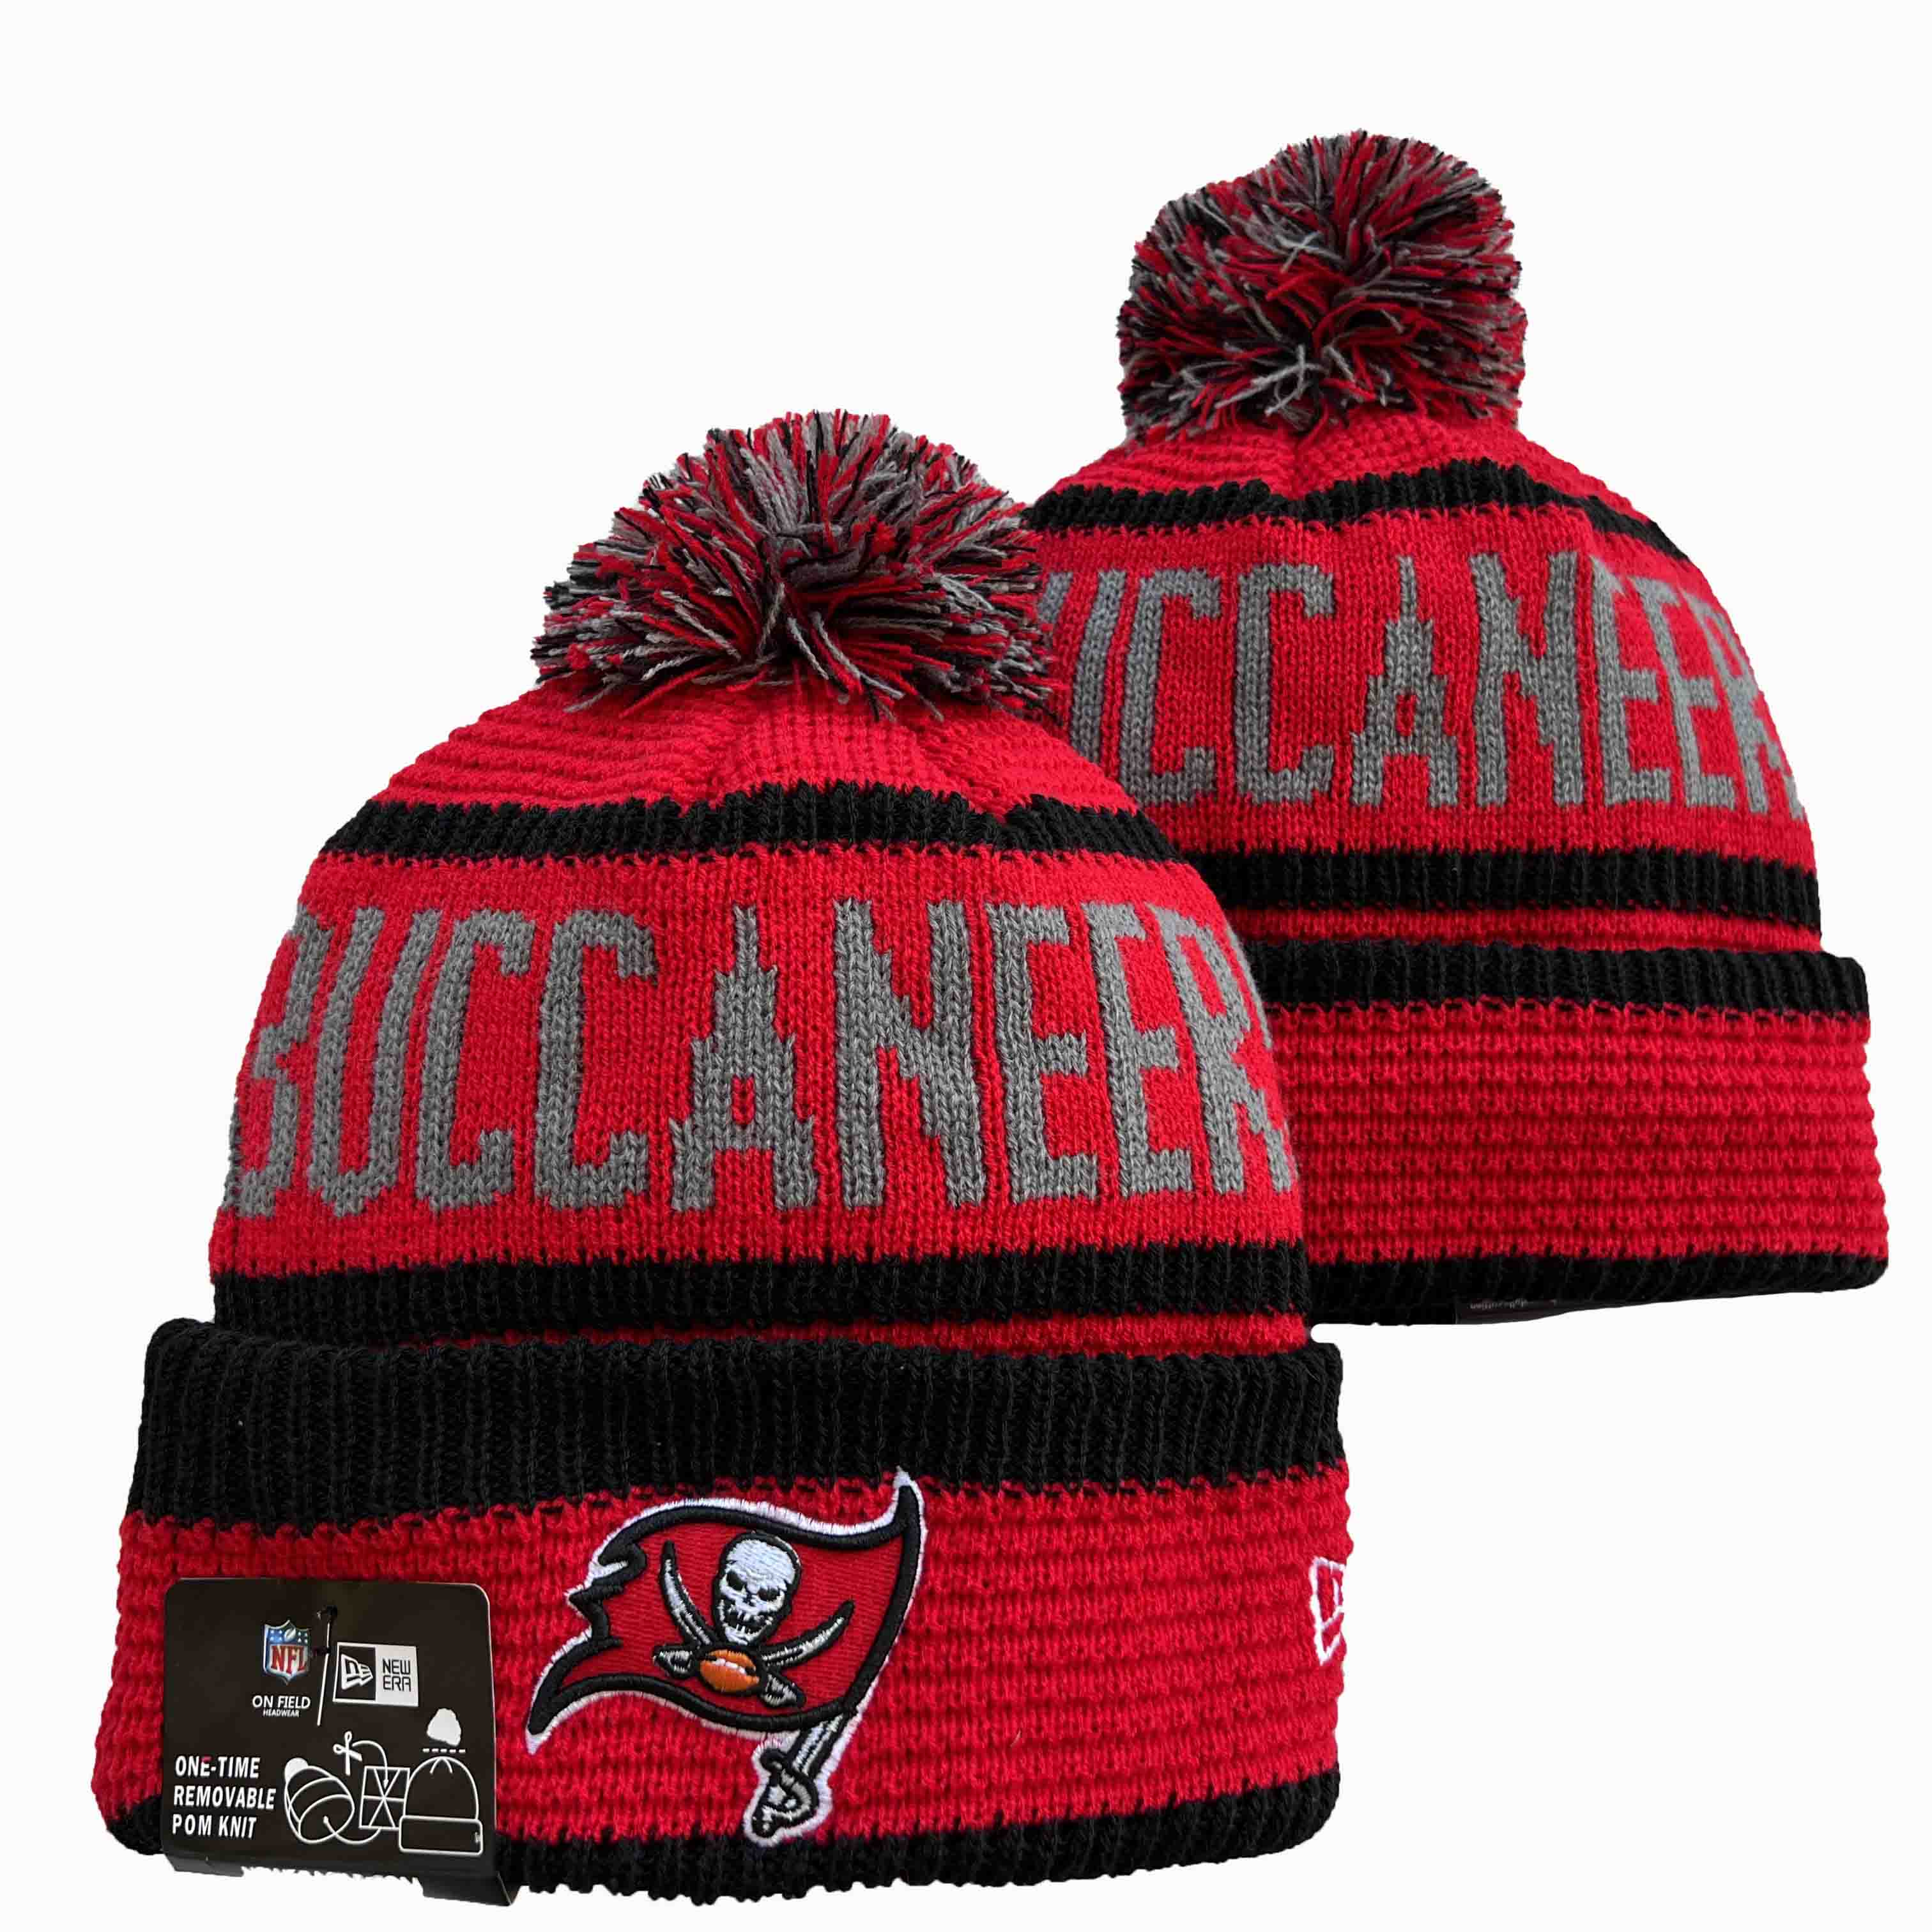 Tampa Bay Buccaneers Knit Hats 082